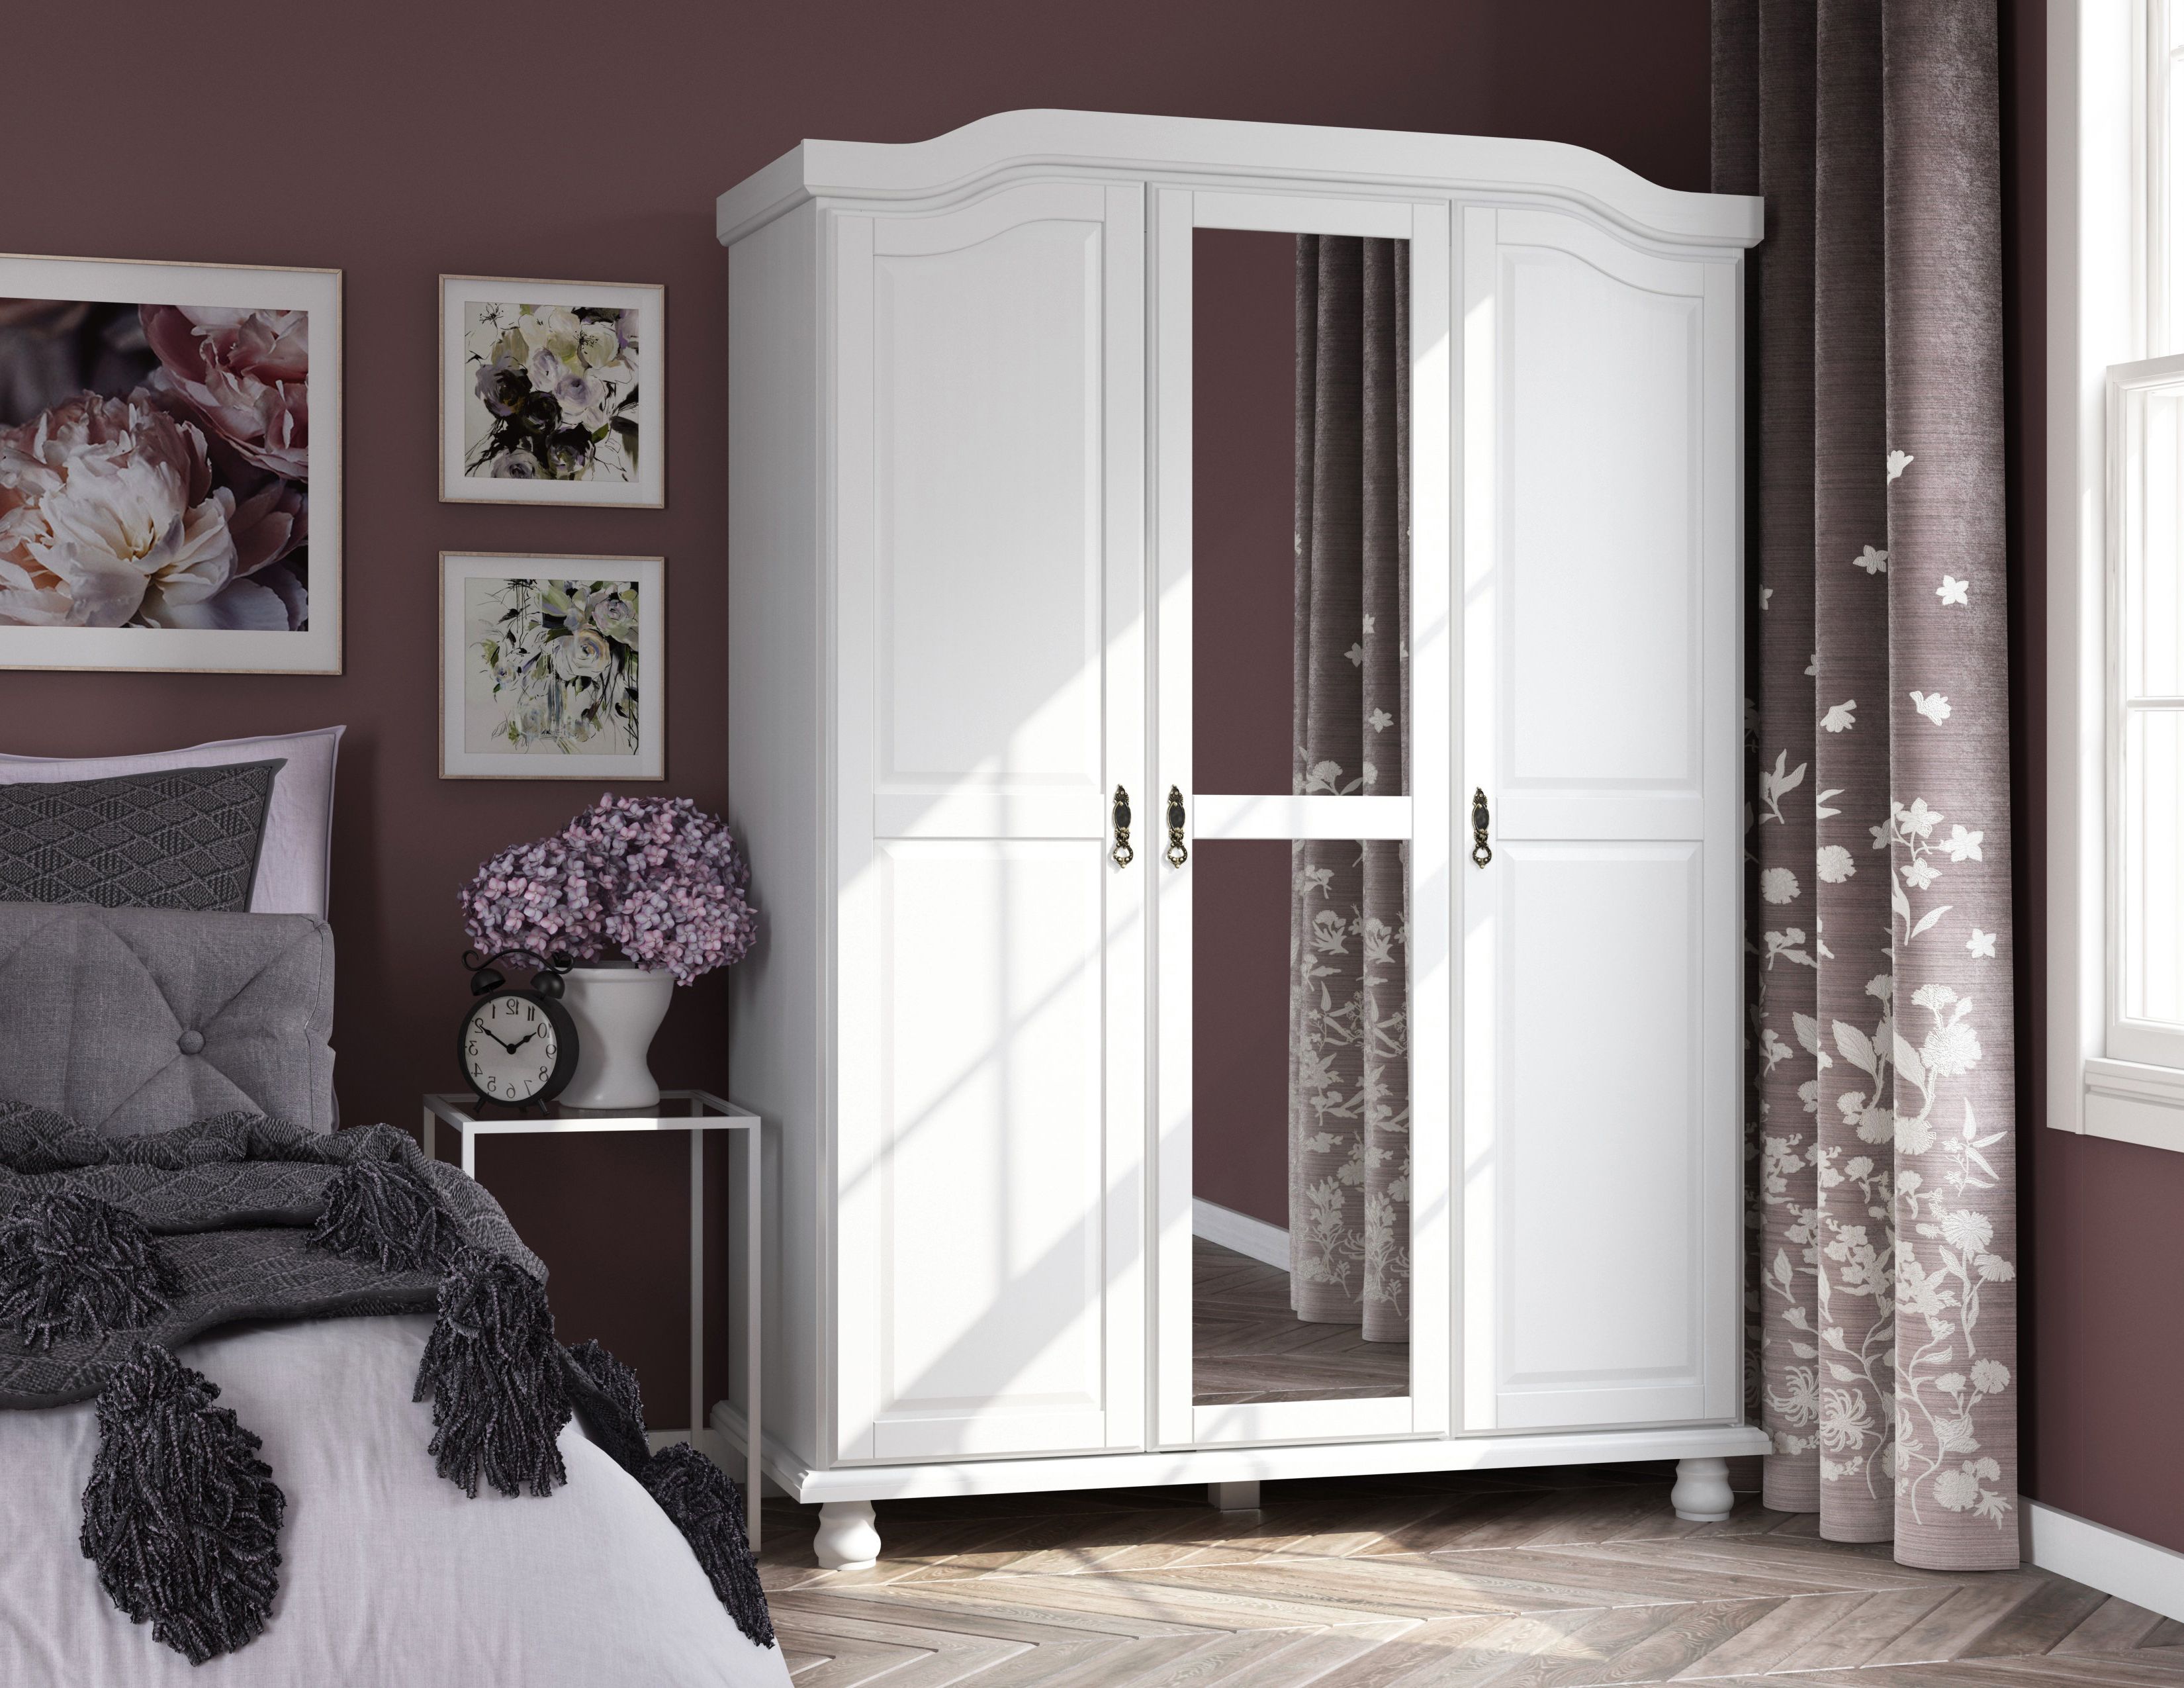 Charlton Home® Anass Kyle 100% Solid Wood 3 Door Wardrobe Armoire With Mirrored  Door & Reviews | Wayfair Throughout White 3 Door Mirrored Wardrobes (View 13 of 20)